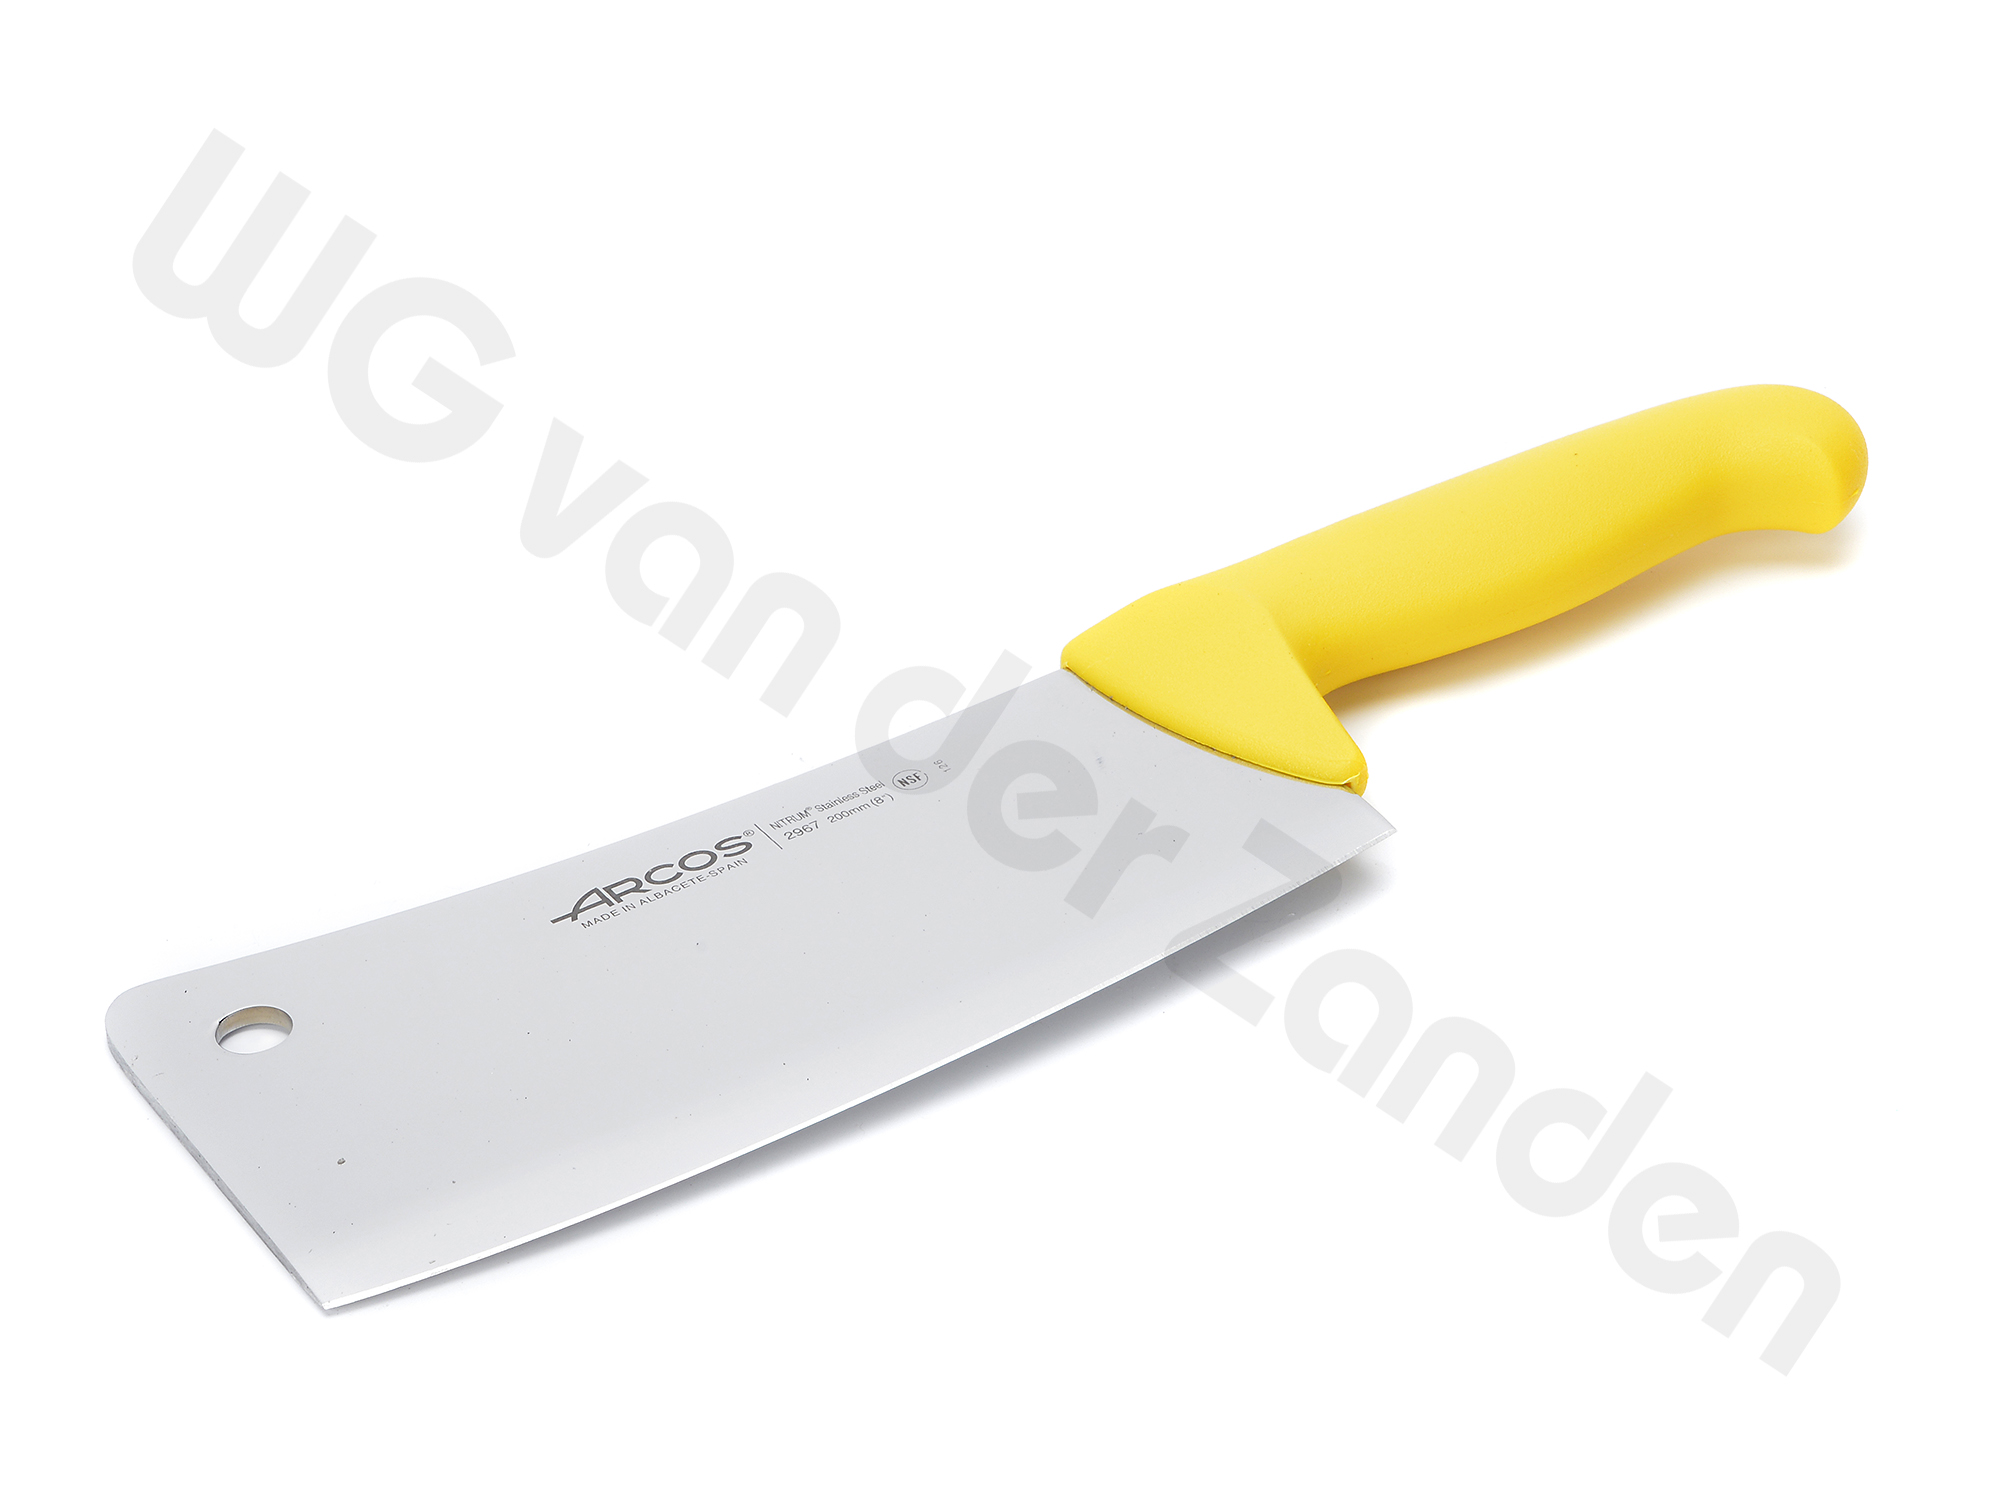 551550 CLEAVER MEAT CHOPPER 20CM YELLOW HANDLE ARCOS